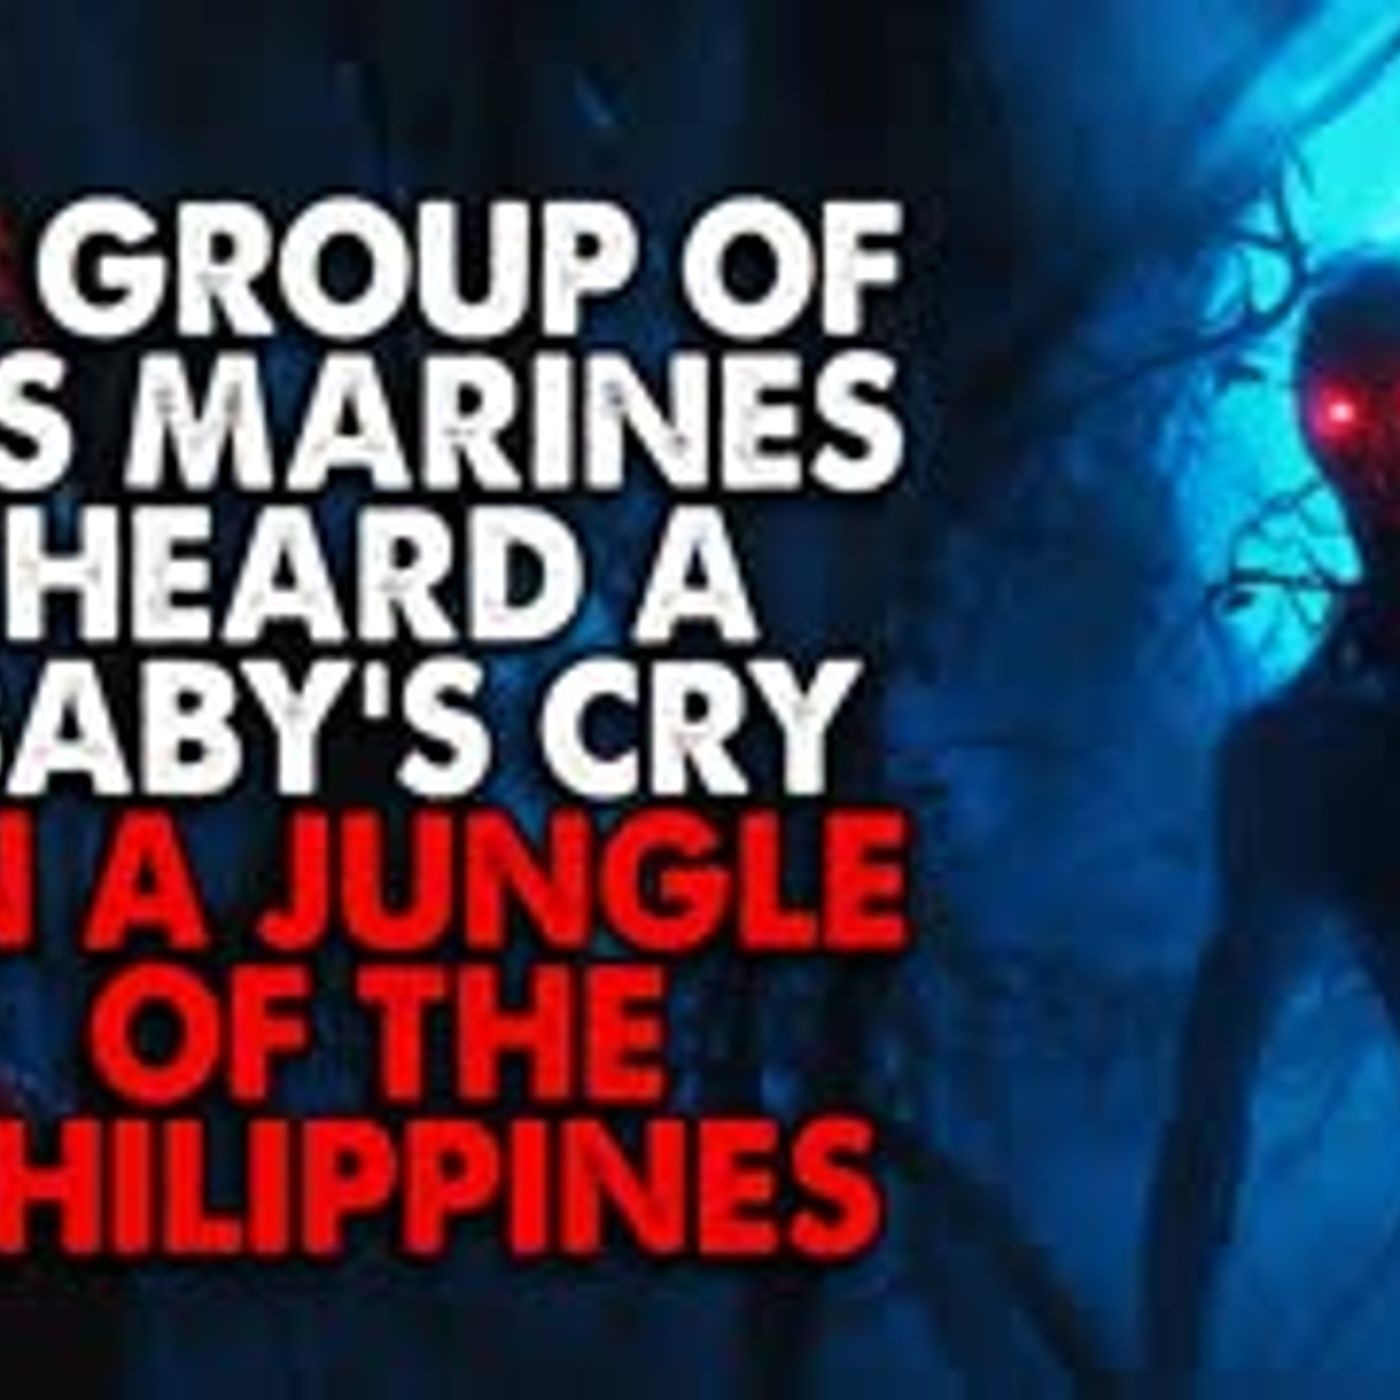 ”A group of US Marines heard a baby’s cry in the jungles of the Philippines” Creepypasta